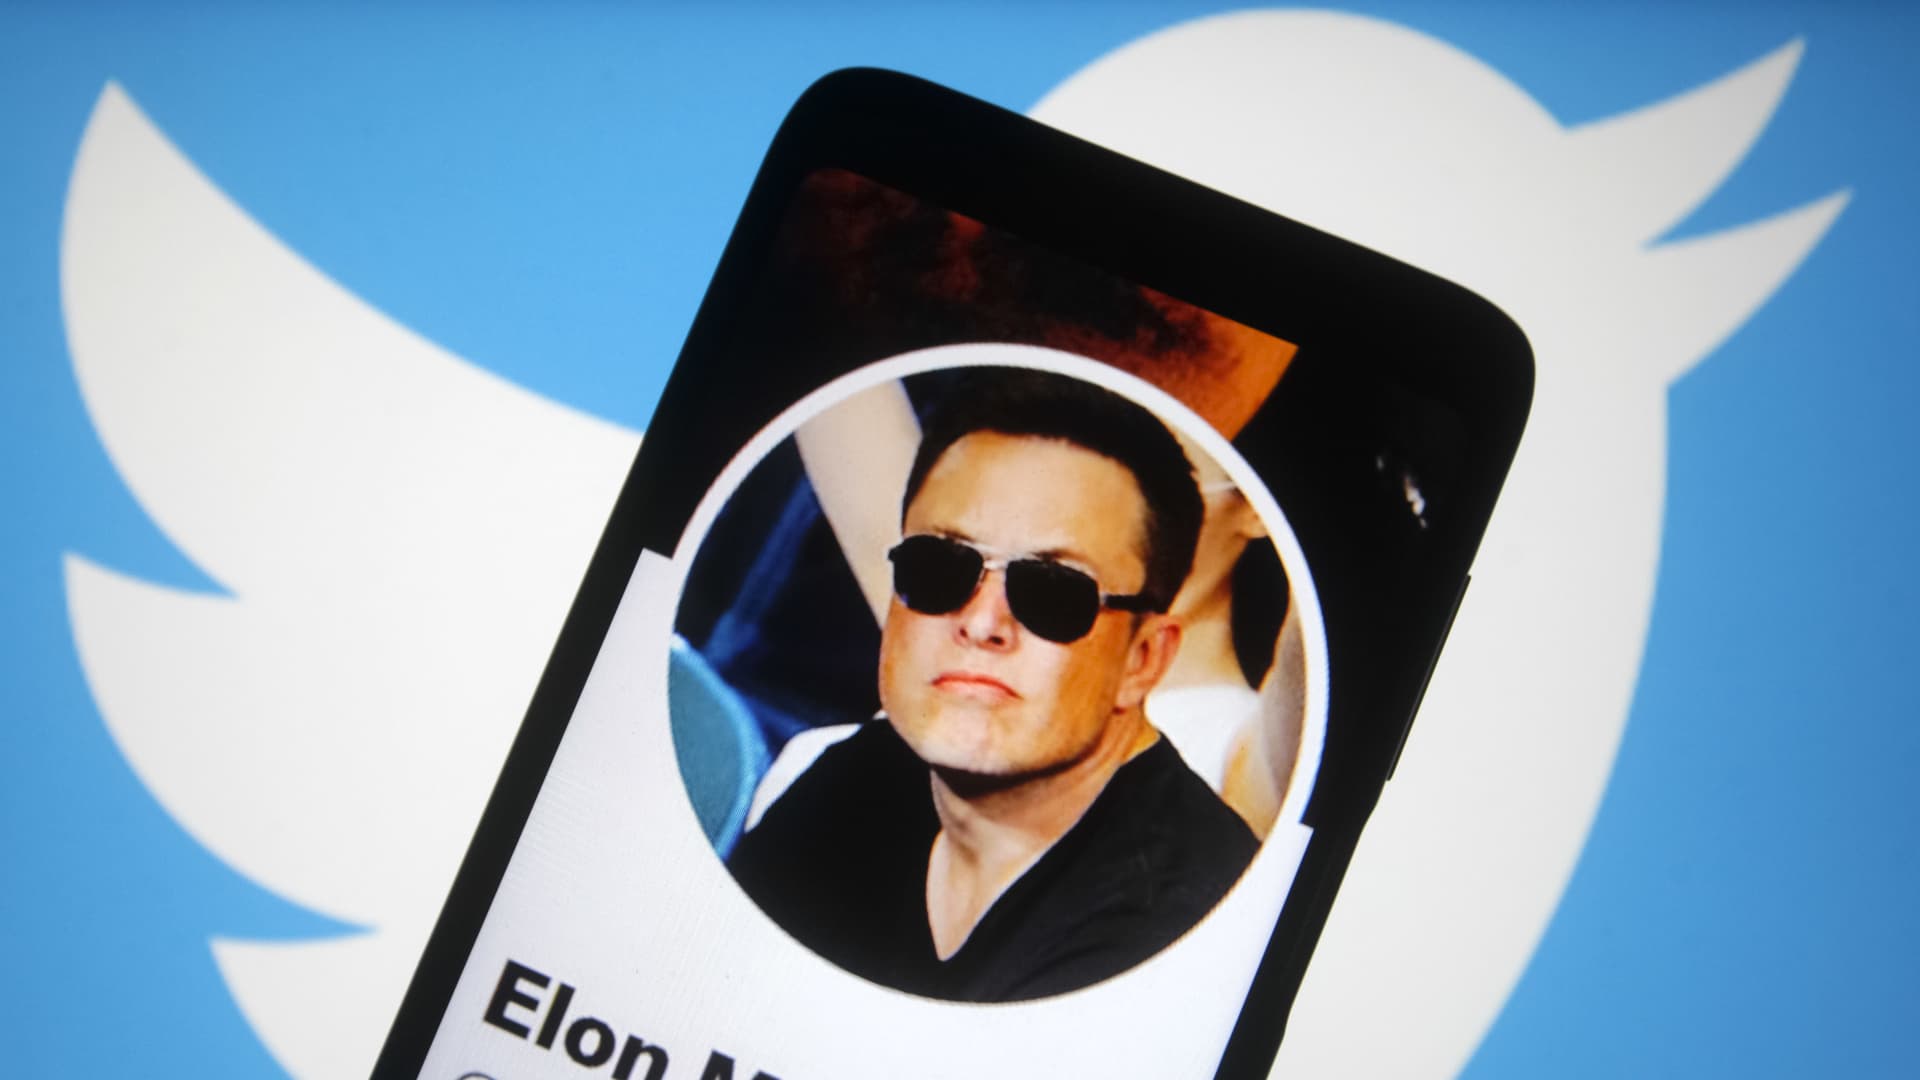 Elon Musk says 3 issues need to be resolved before his Twitter buyout can go ahead